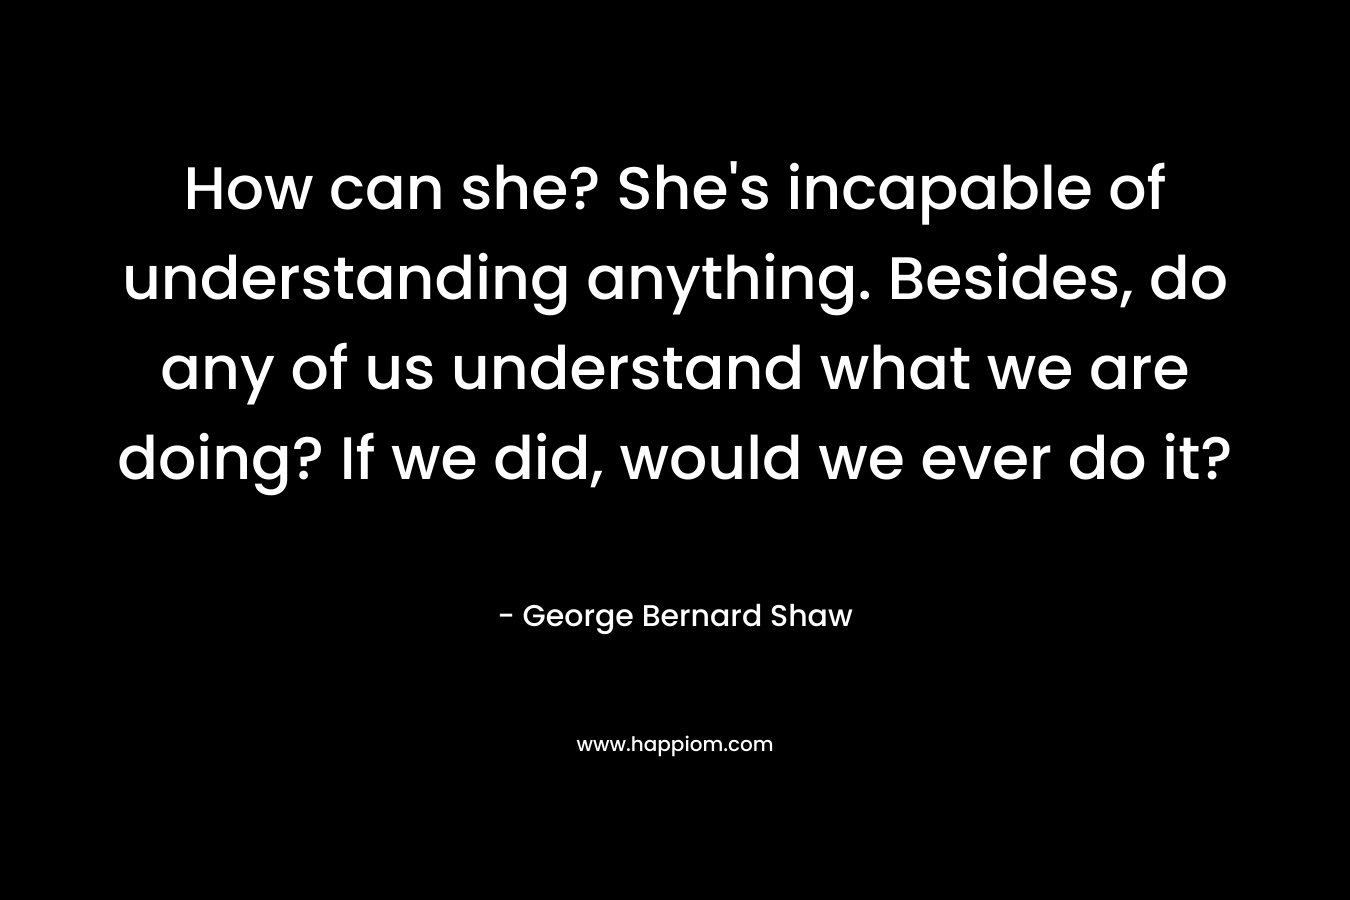 How can she? She’s incapable of understanding anything. Besides, do any of us understand what we are doing? If we did, would we ever do it? – George Bernard Shaw